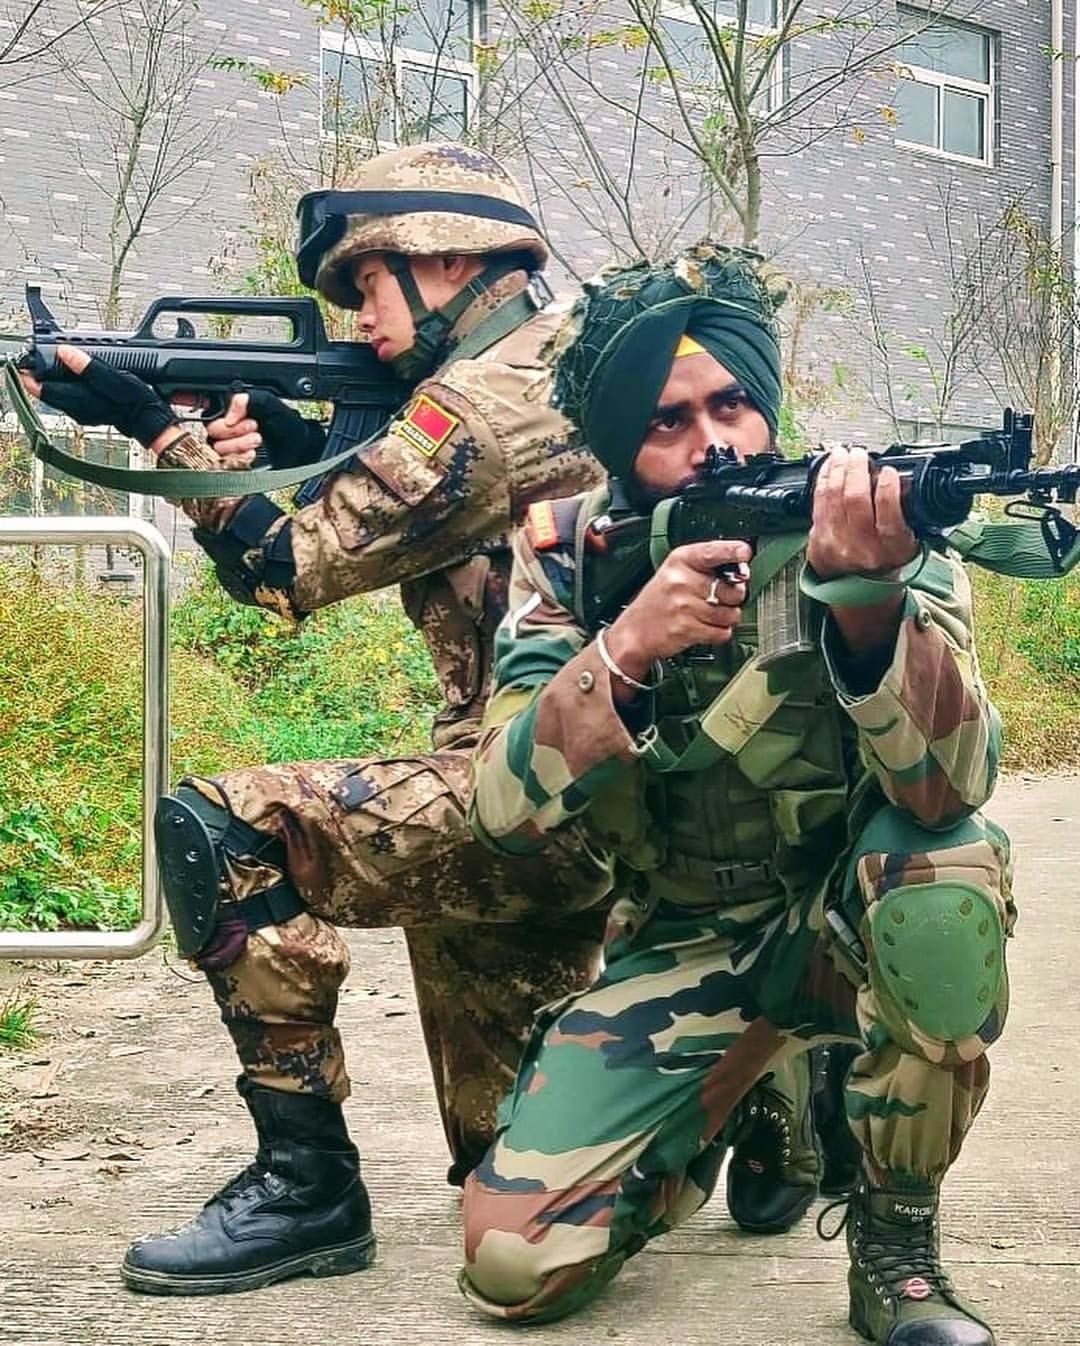 Ex Hand In Hand Indian Troops And Chinese Army. Army Ranks, Indian Army Special Forces, Indian Army